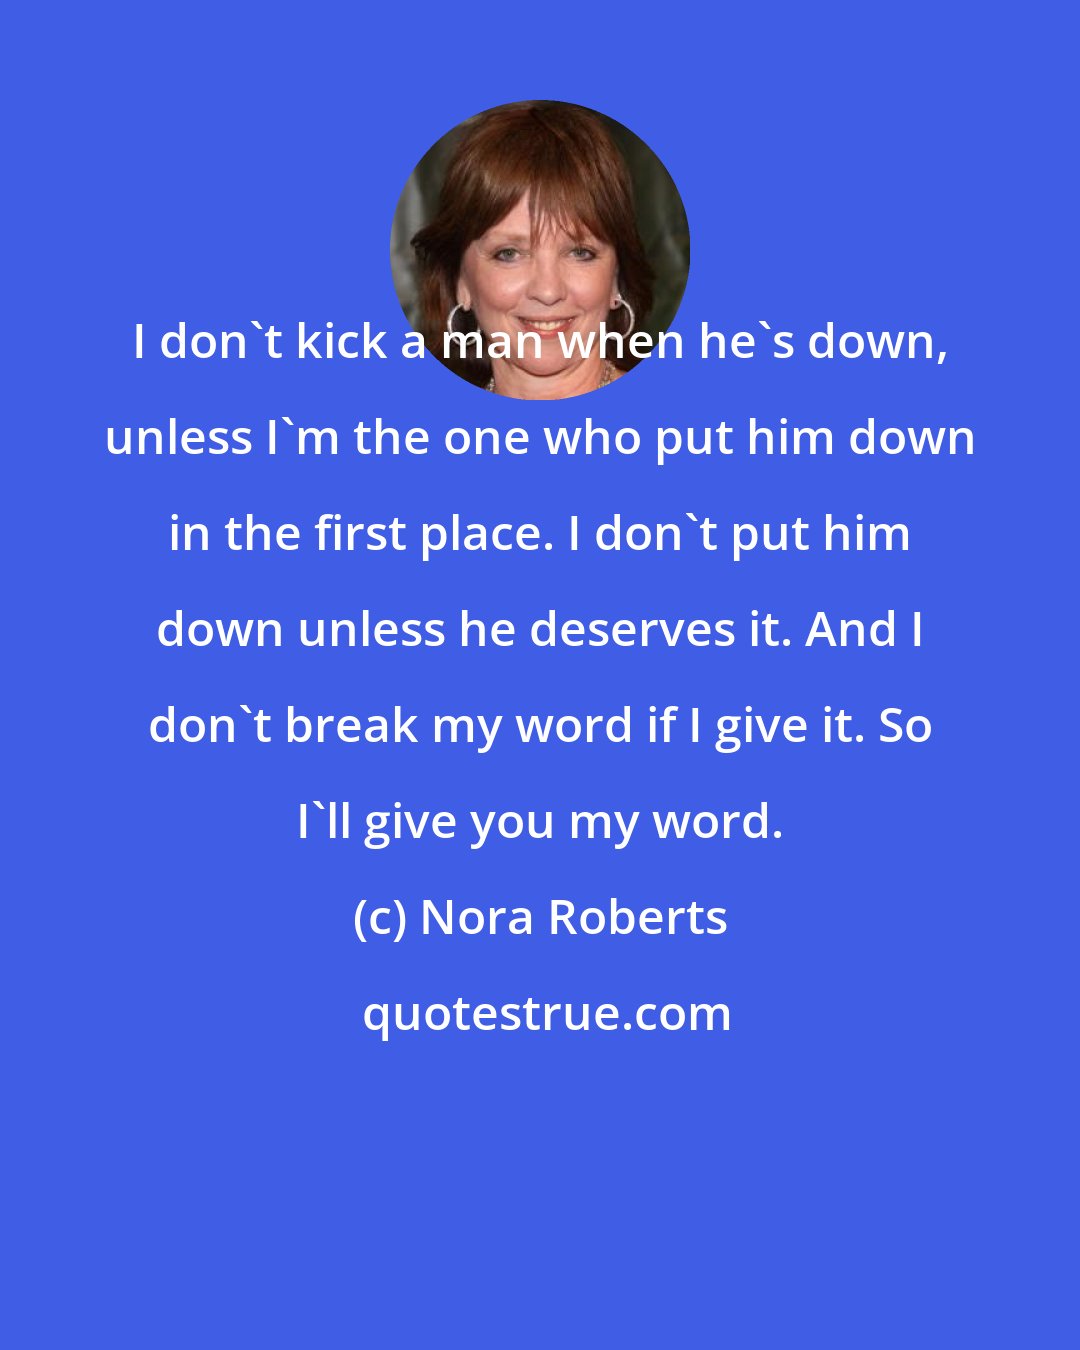 Nora Roberts: I don't kick a man when he's down, unless I'm the one who put him down in the first place. I don't put him down unless he deserves it. And I don't break my word if I give it. So I'll give you my word.